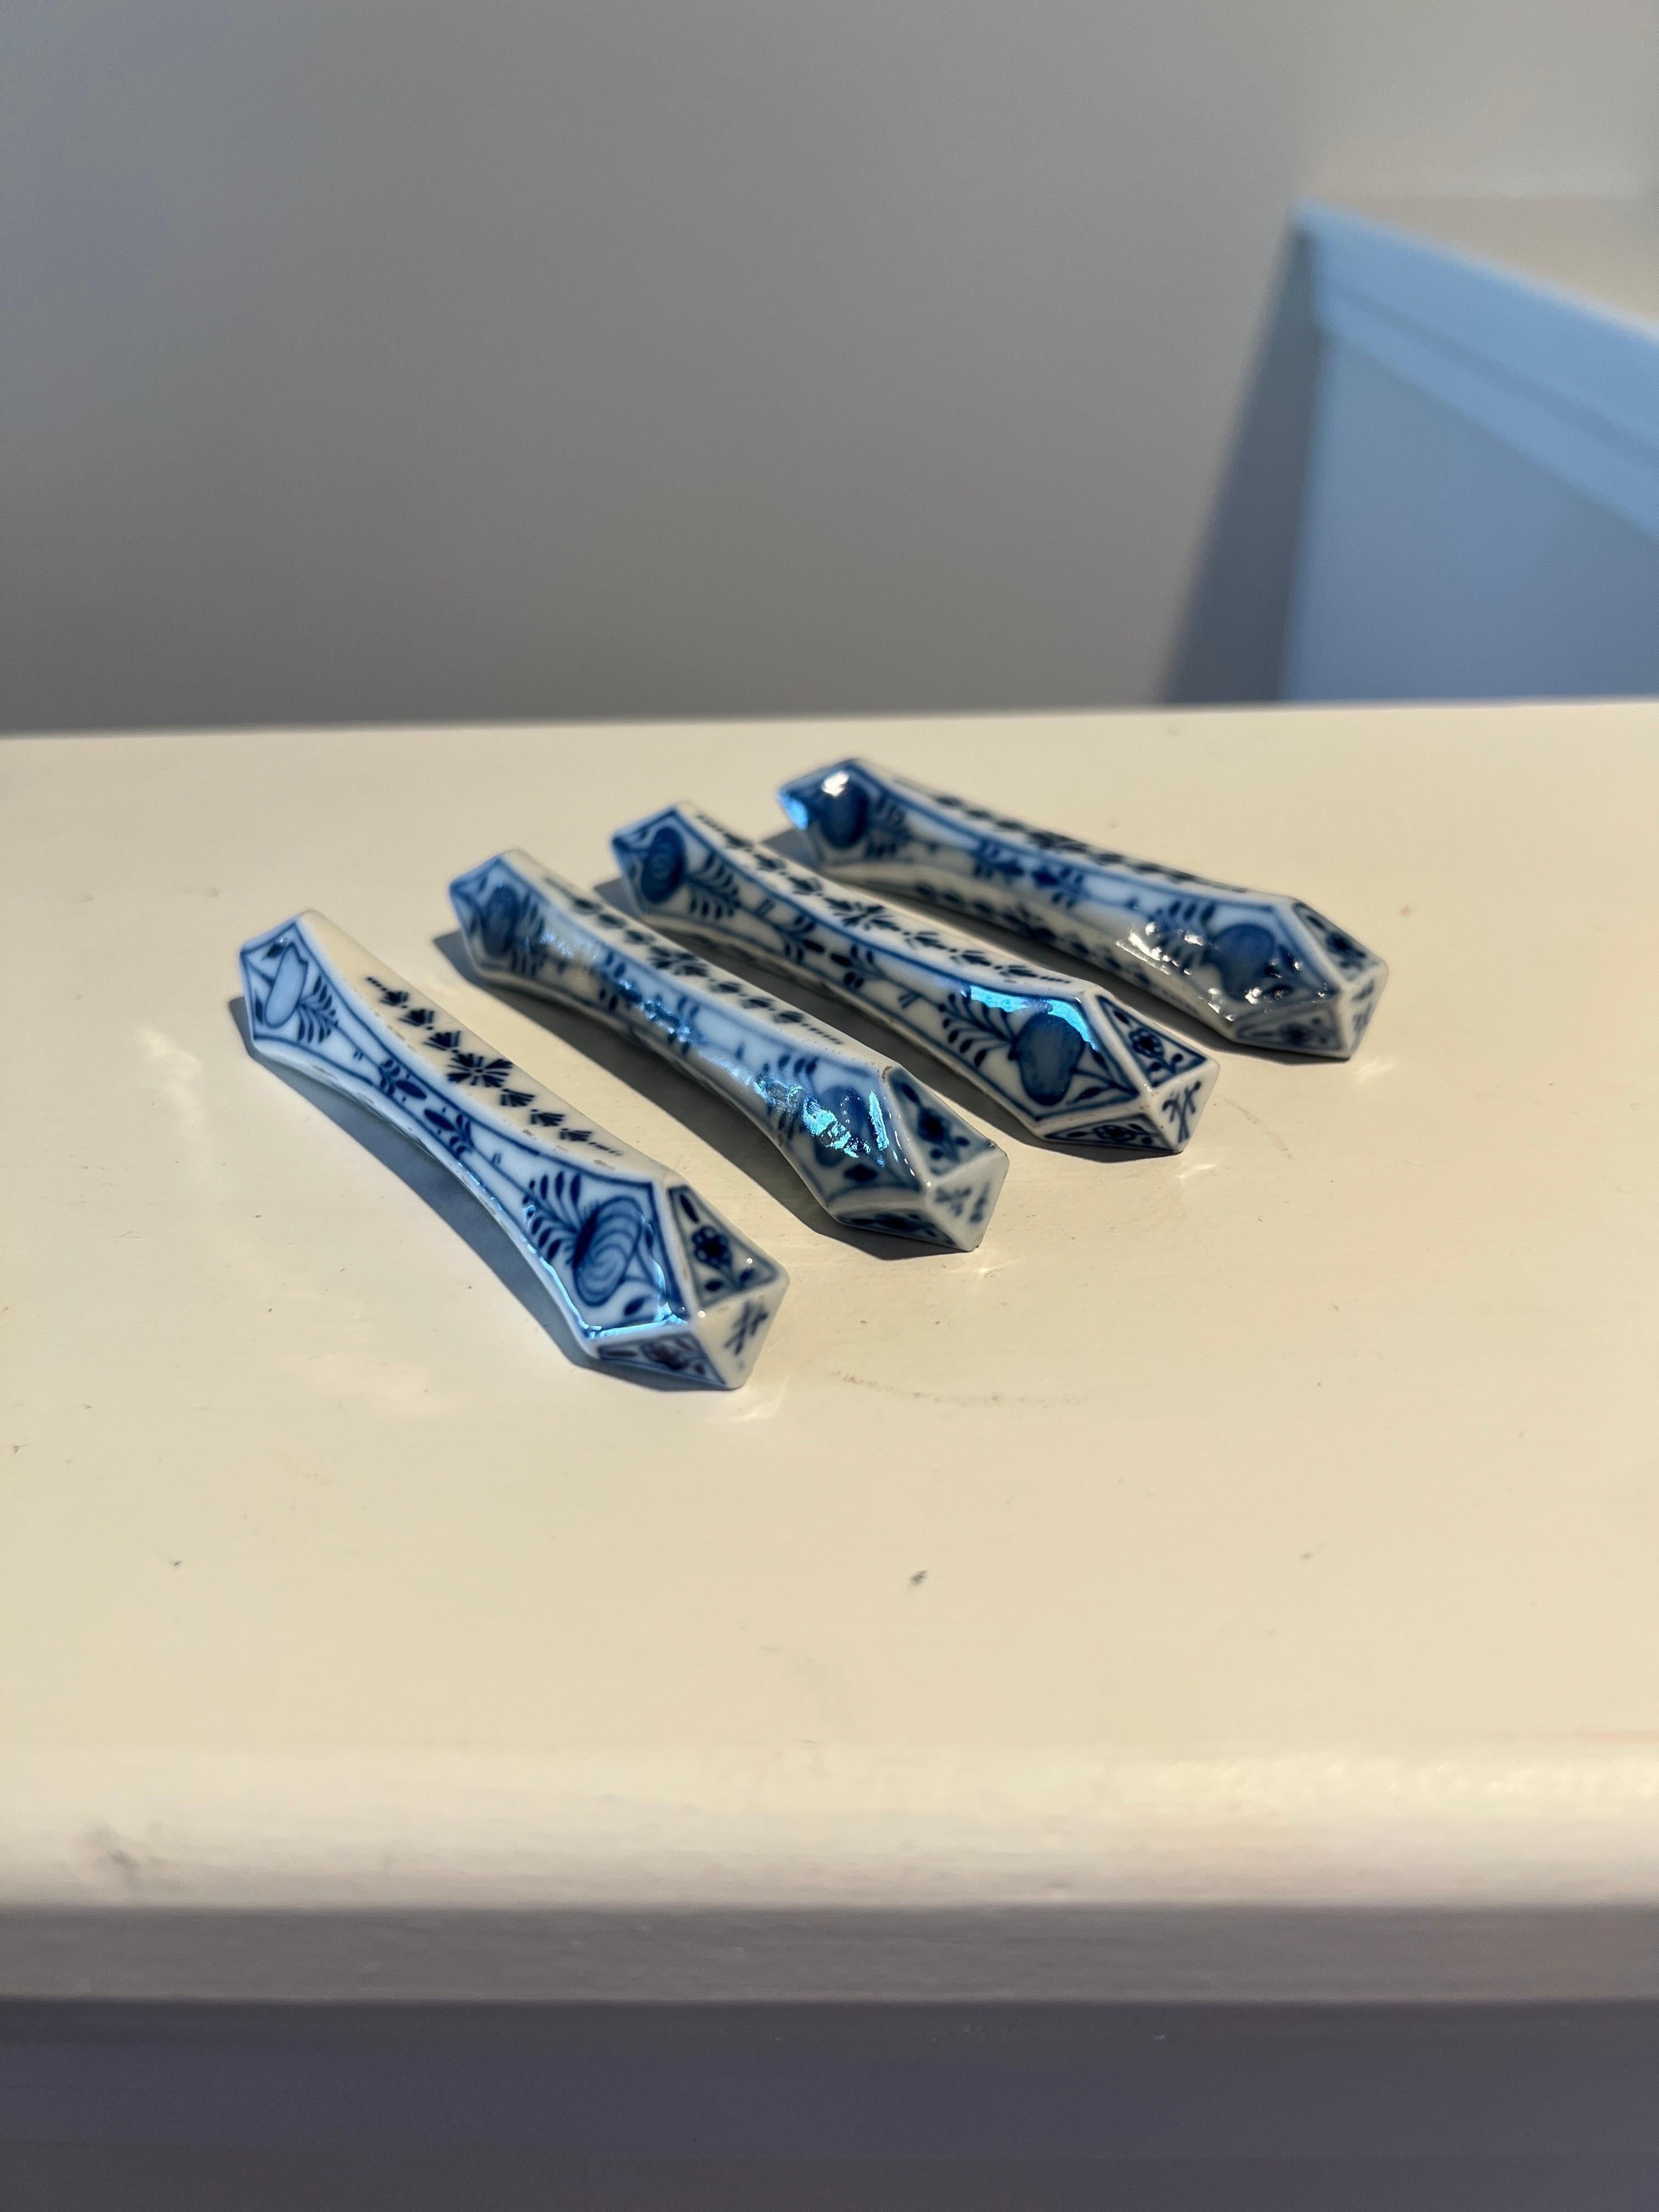 Meissen (German, founded 1710), circa late 19th century. 

A set of 4 antique Meissen blue onion pattern knife rests. Each marked appropriately. 